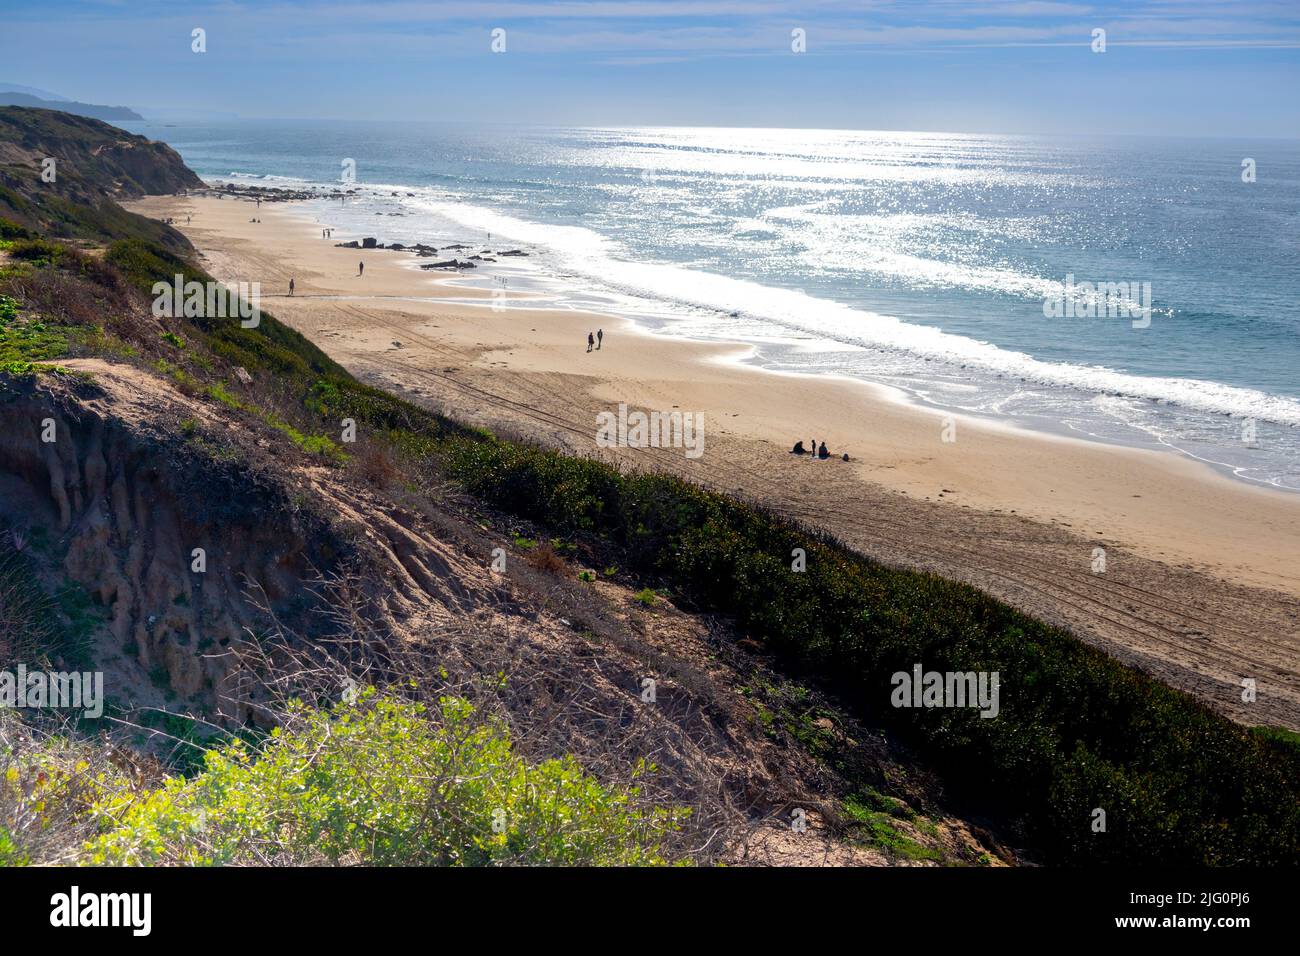 View of southern Californian coastline from Observation point Crystal Cove state park near Pelican Hill near Newport Beach California USA Stock Photo